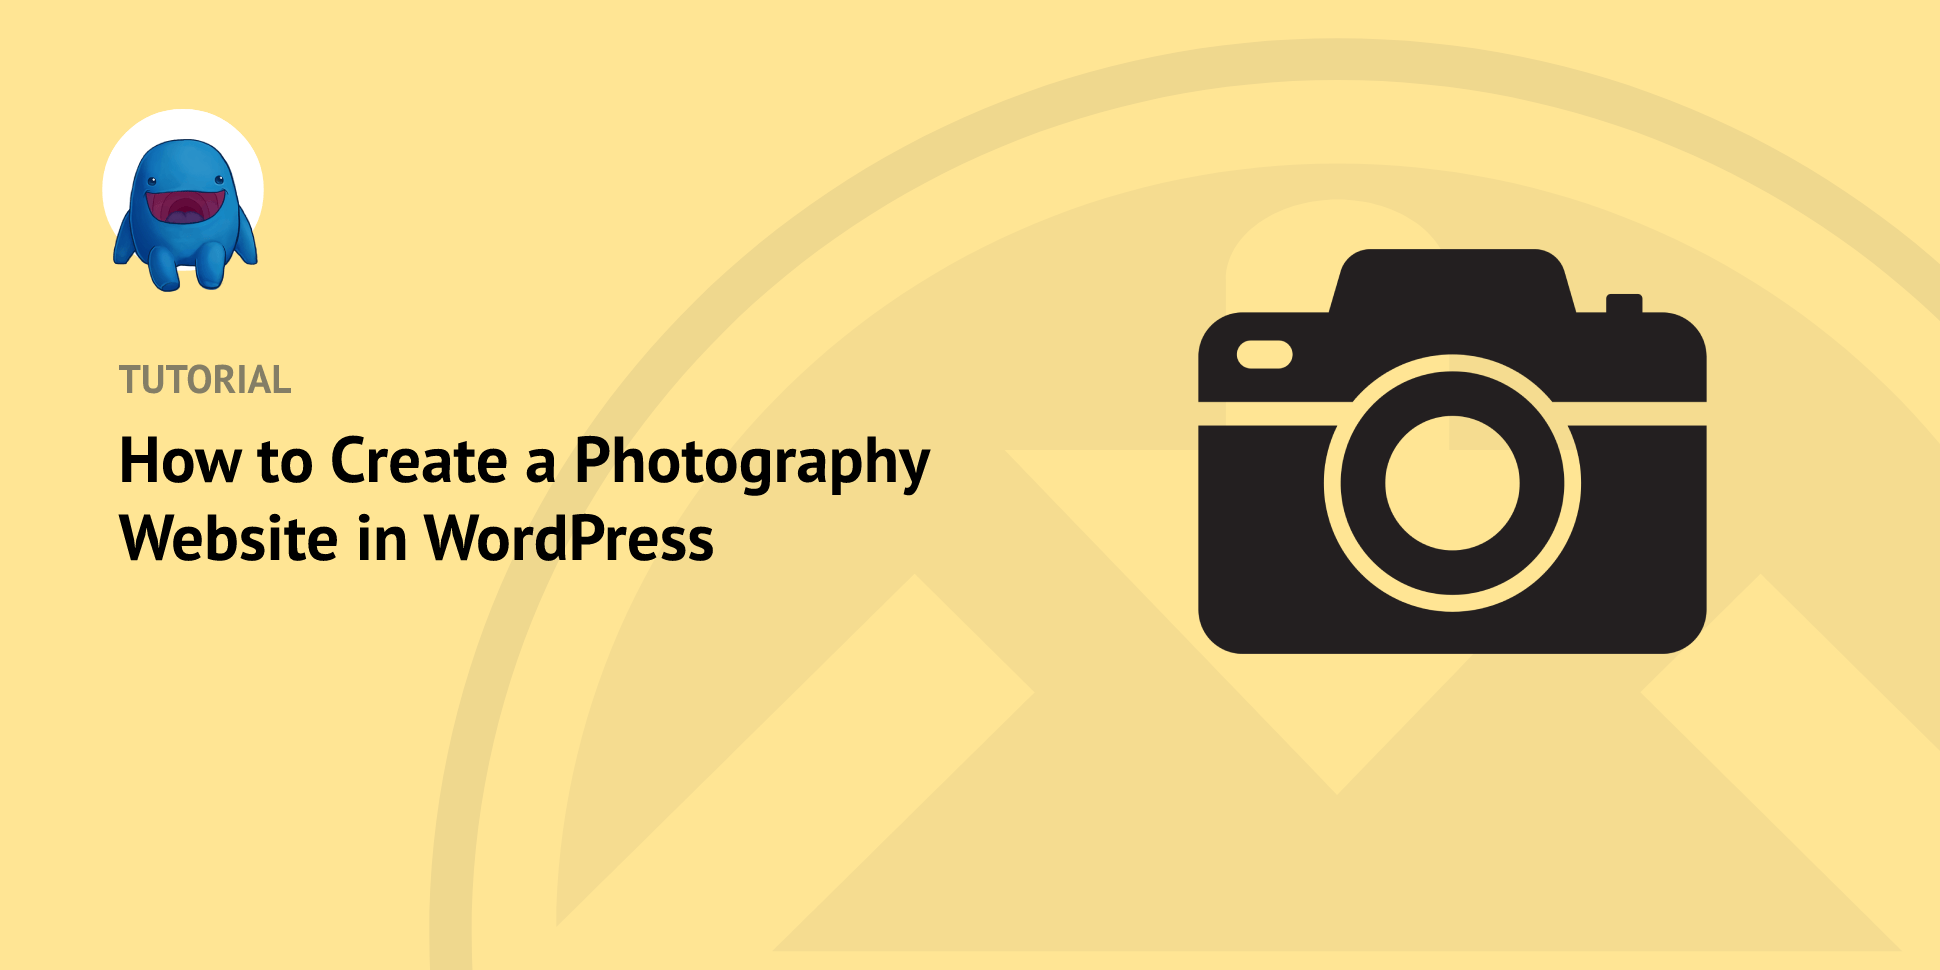 How to Create a Photography Website in WordPress